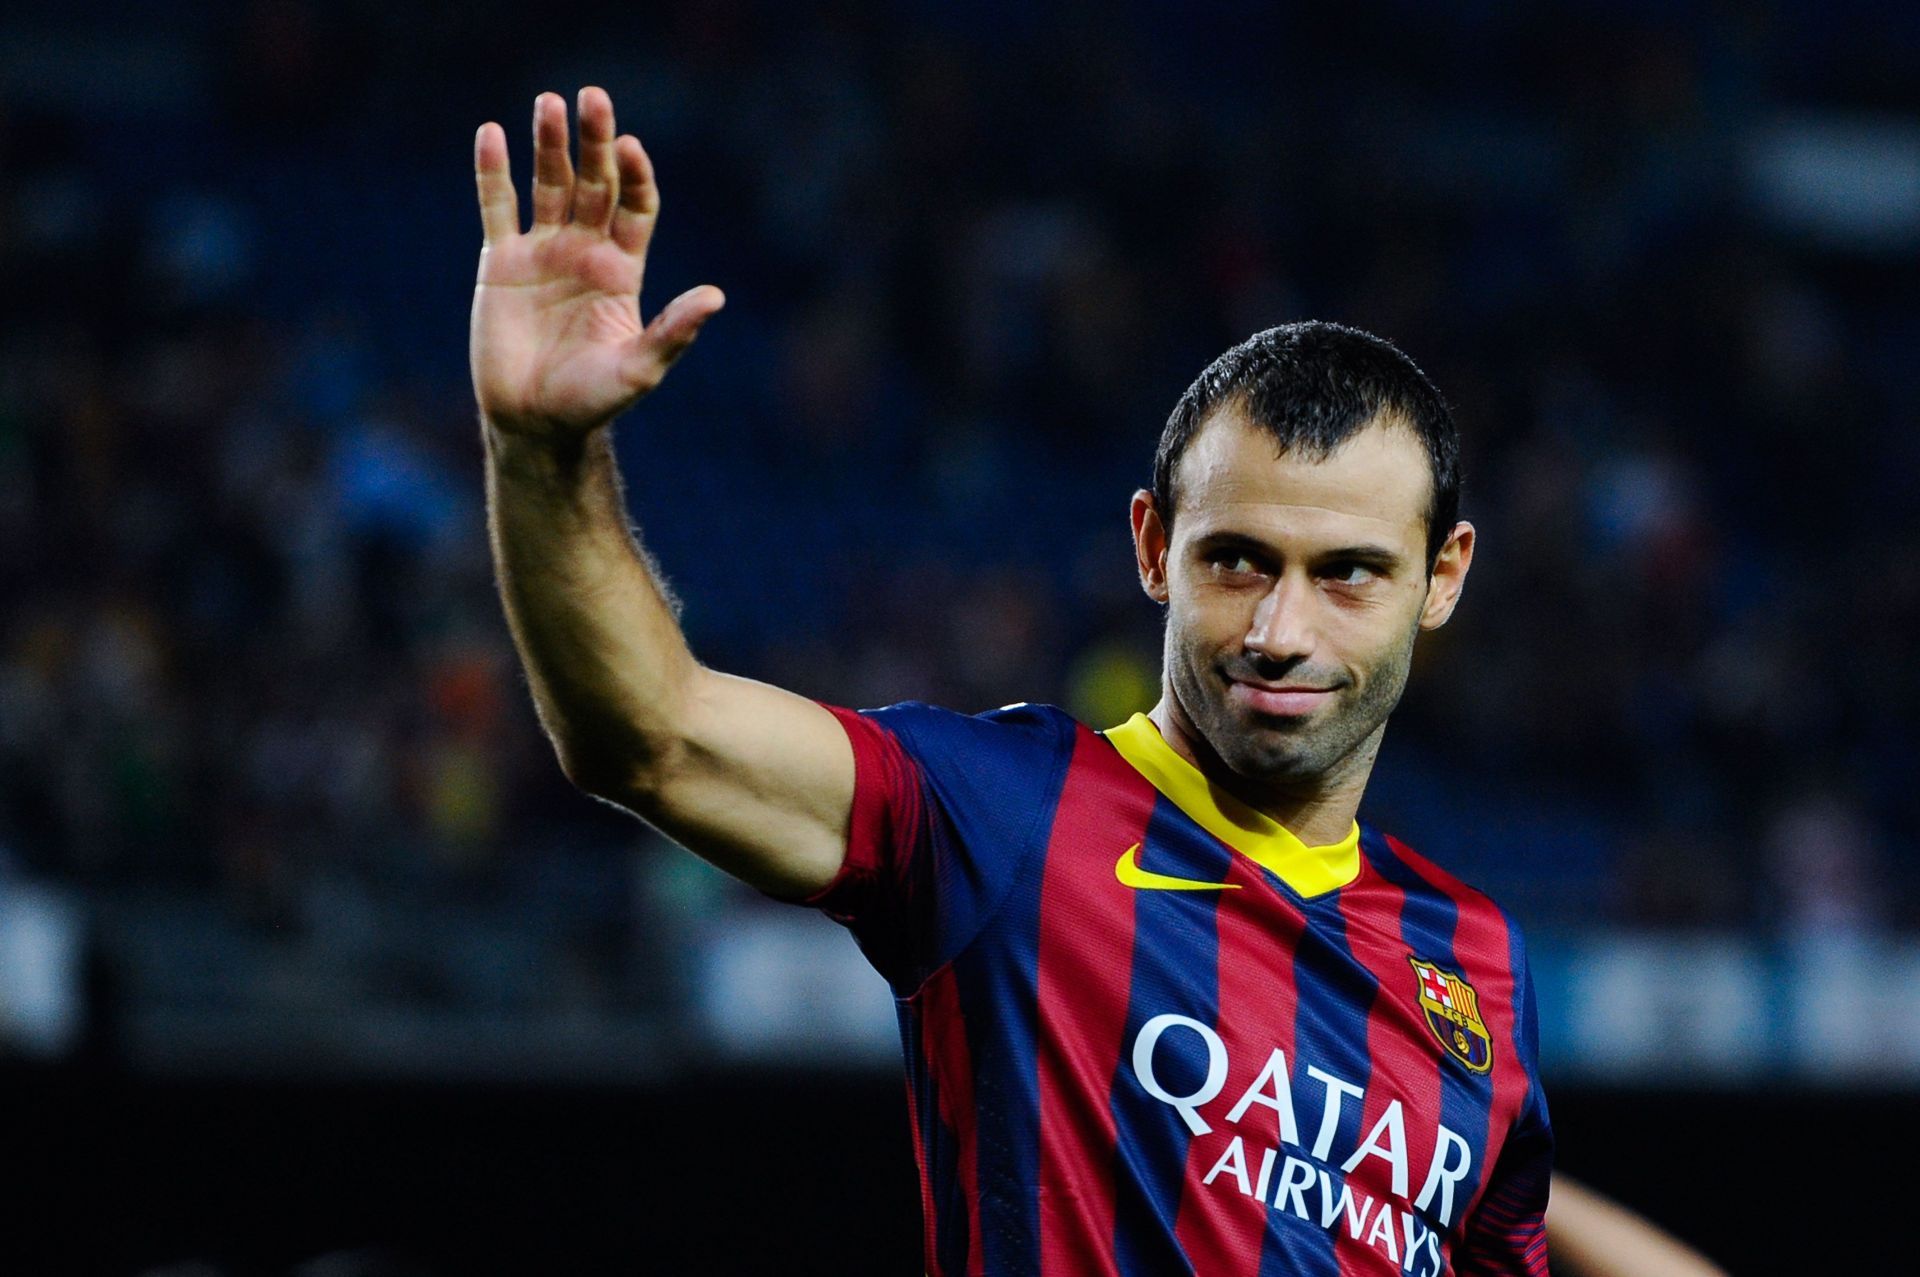 Mascherano remained a vital cog for Barcelona throughout his tenure